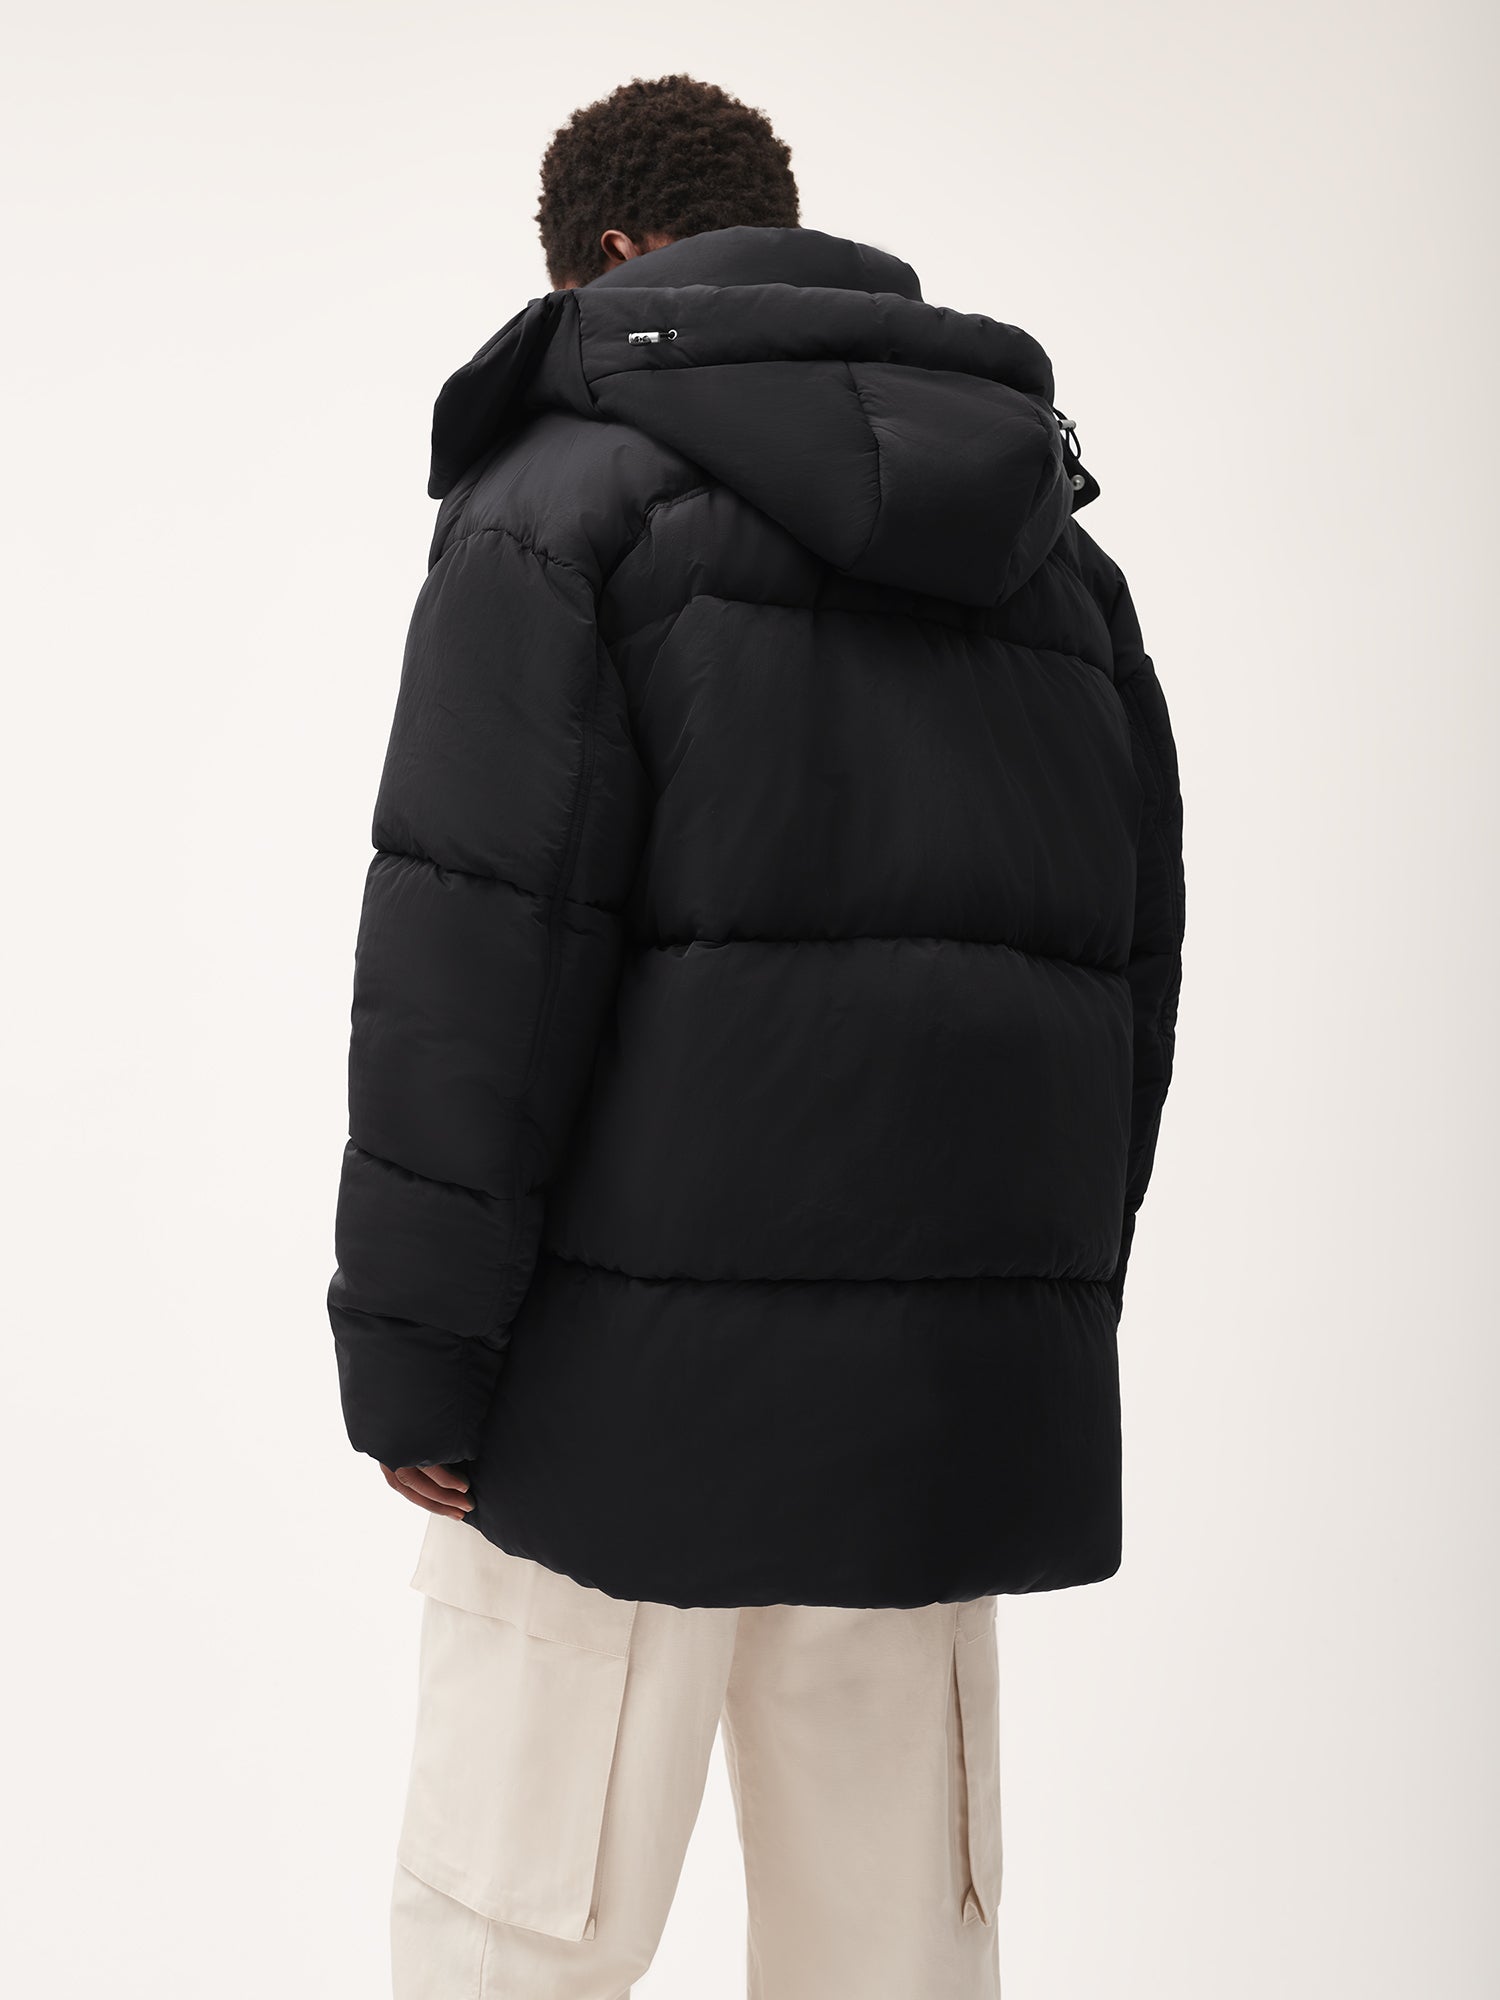 FLWRDWN_Recycled_Nylon_Exaggerated_Long_Puffer_Black_Male-2